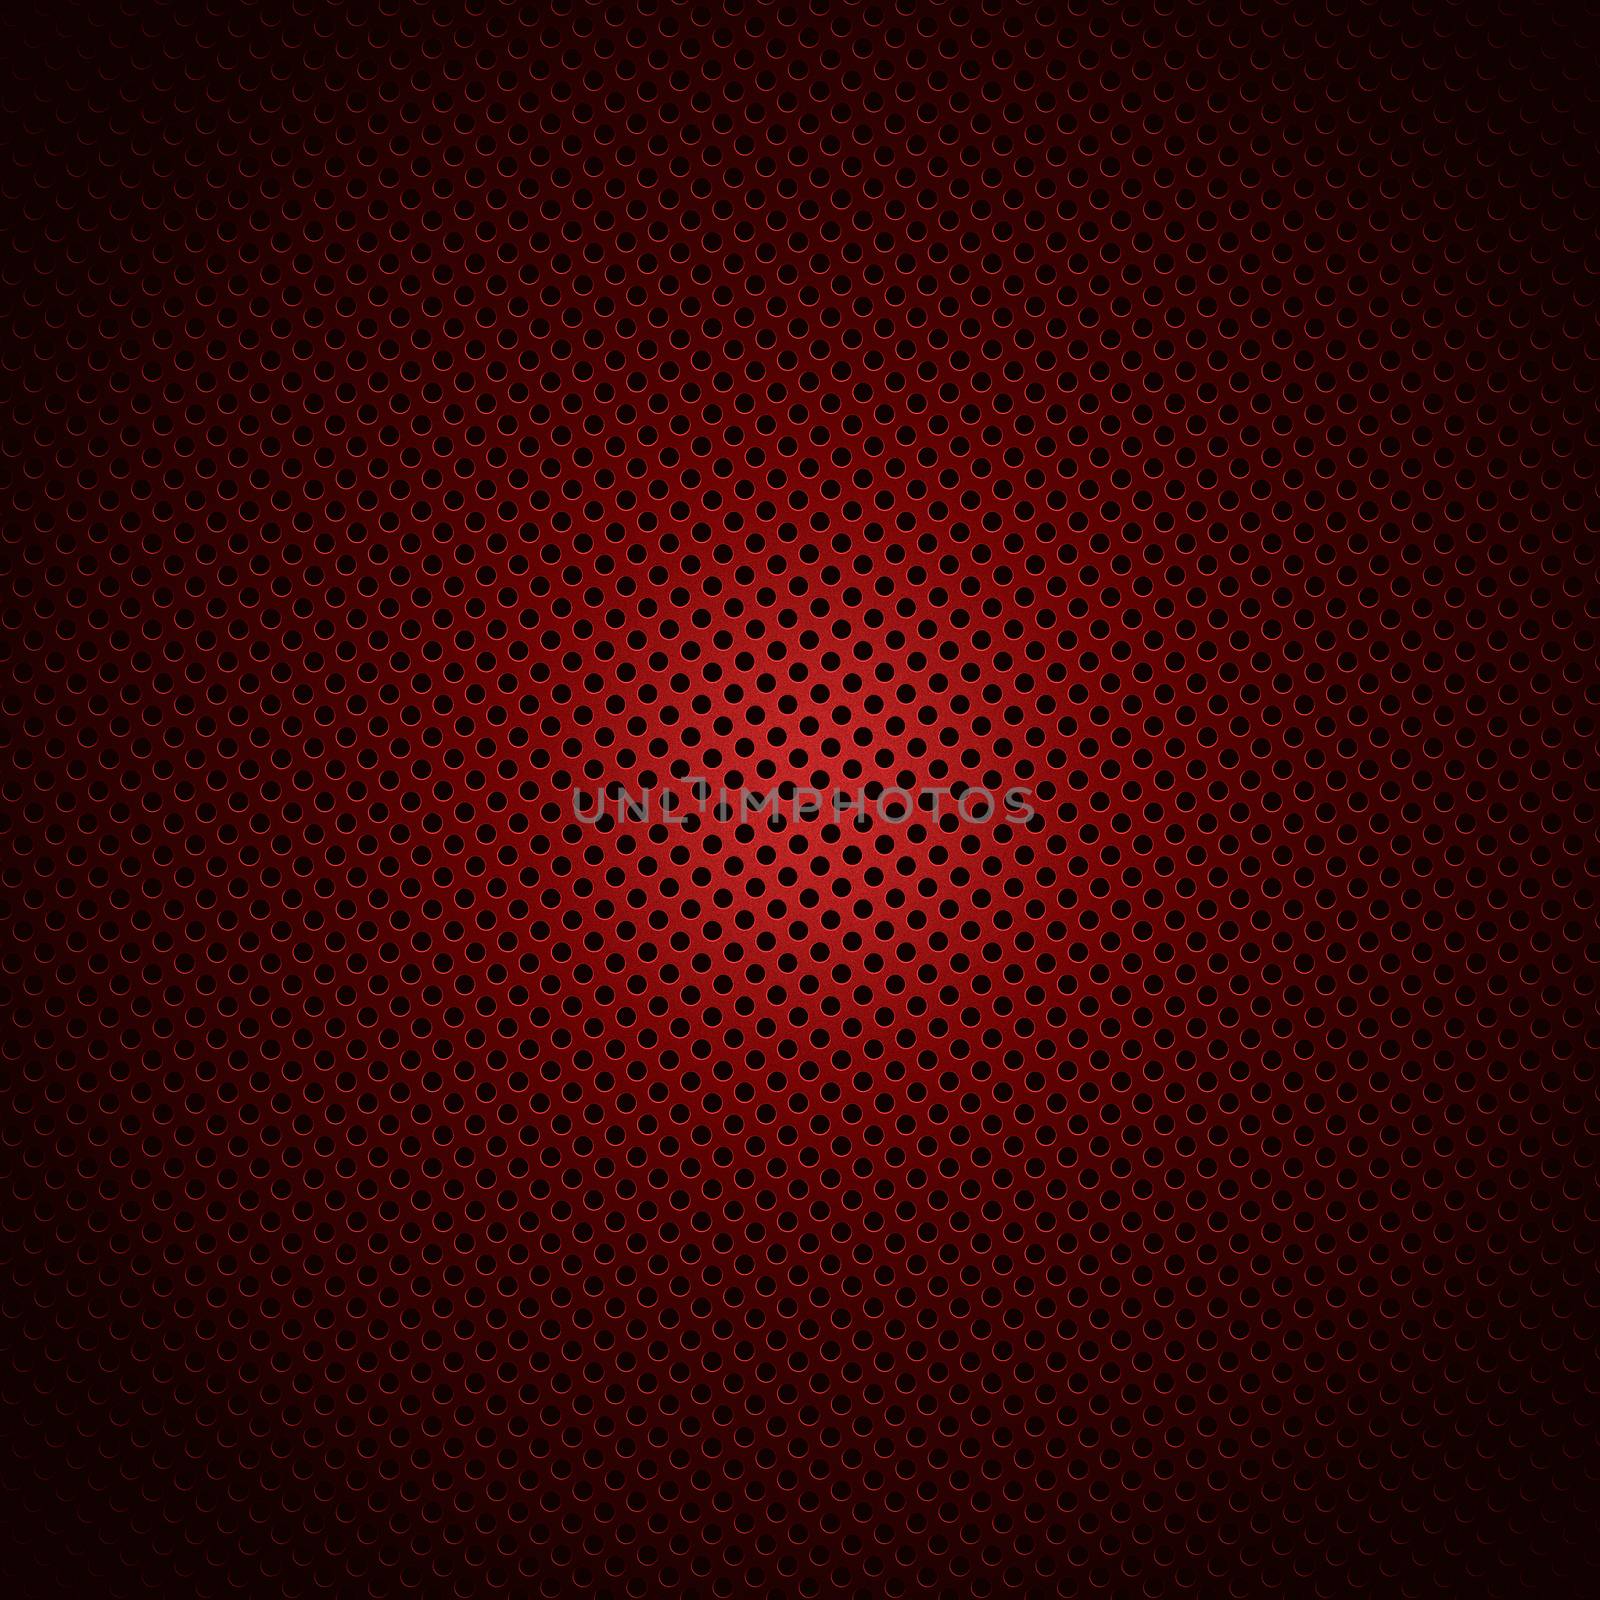 Red circle pattern texture or background